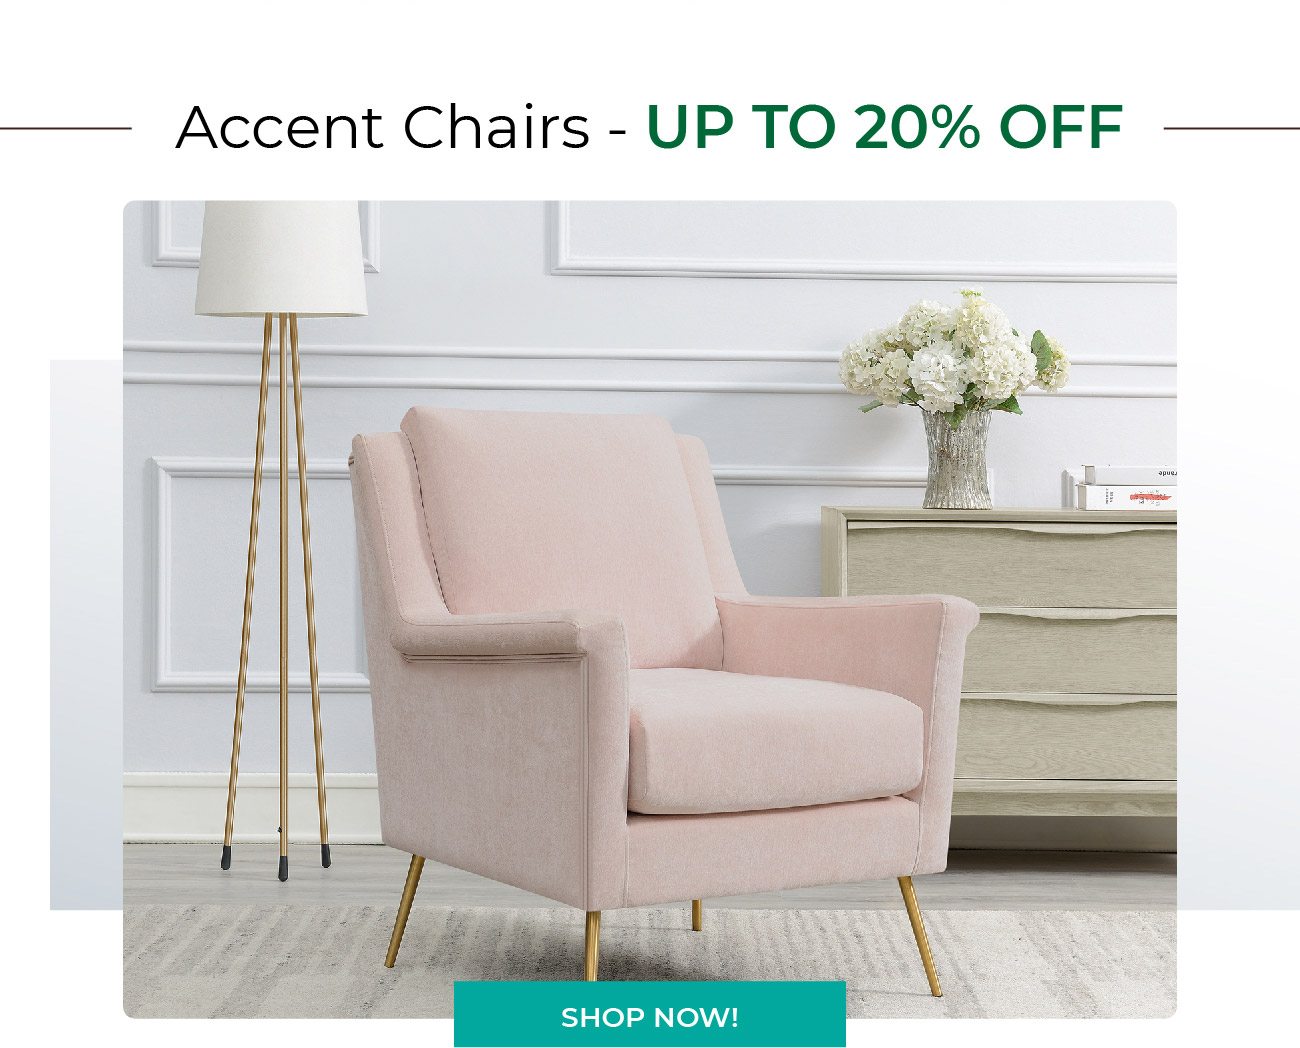 Accent Chairs - Up to 20% off